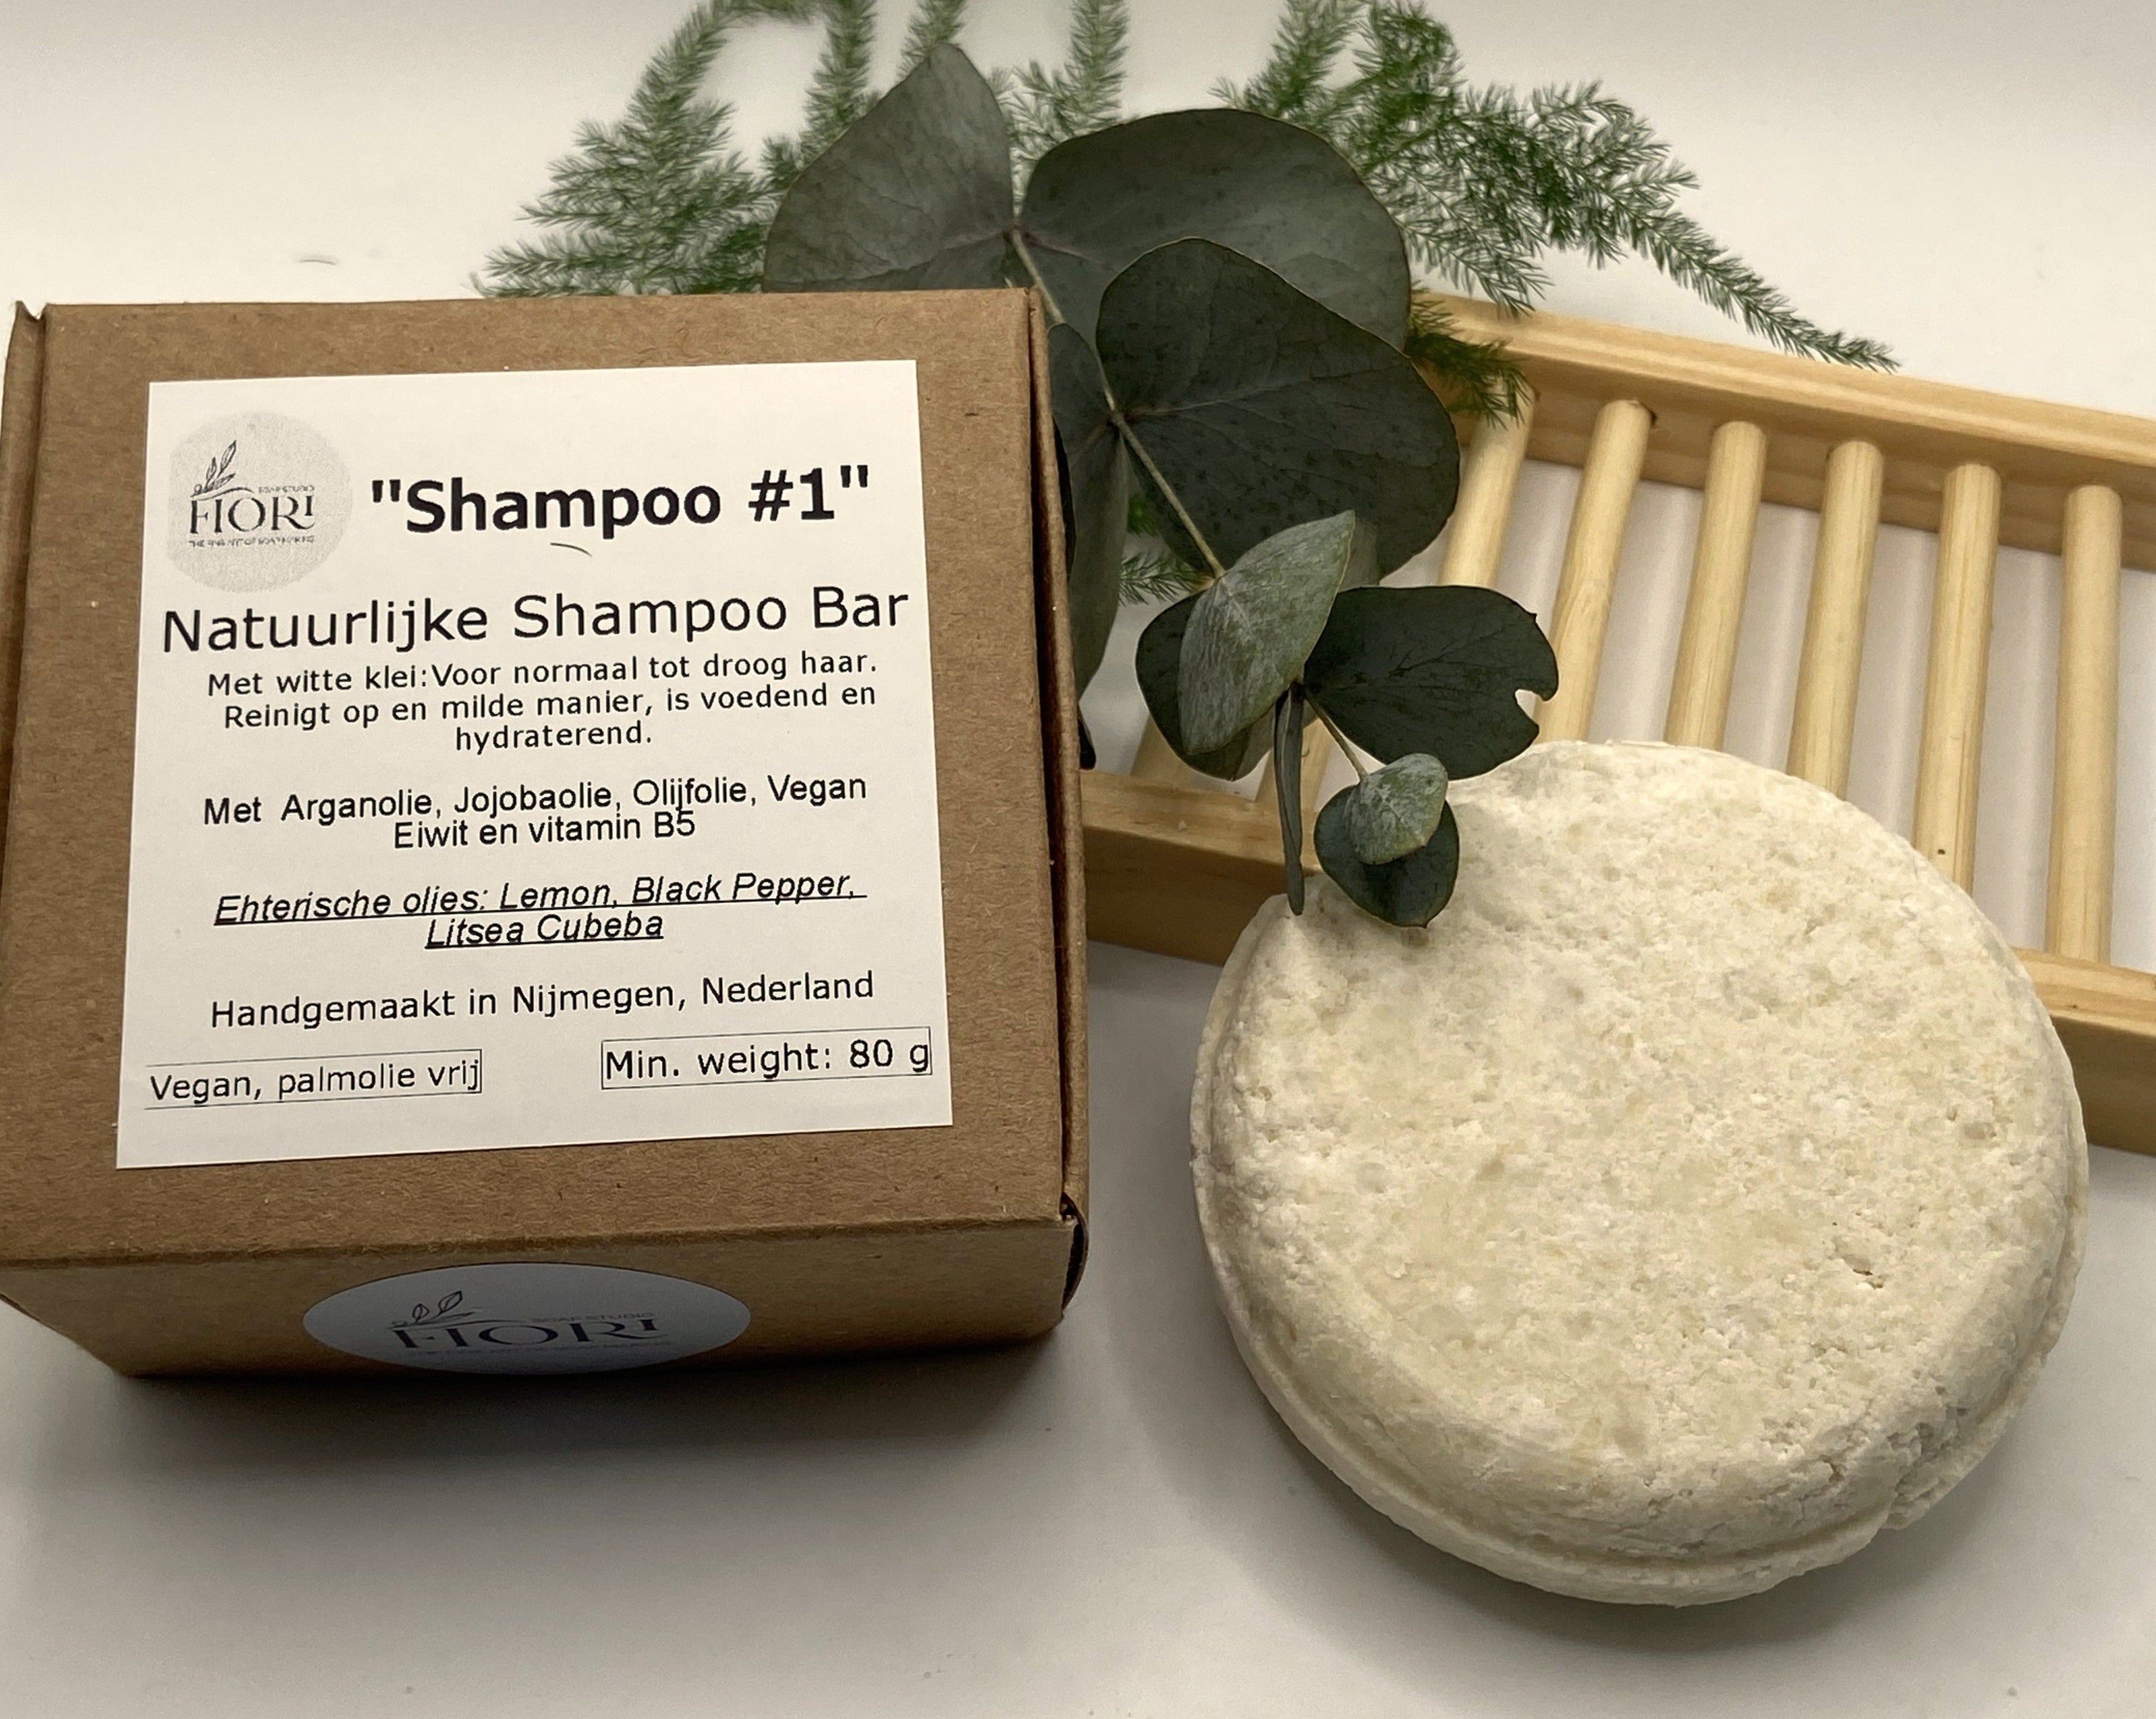 Perfect shampoo bar with jojoba oil, argan oil and olive oil. For normal to dry hair most beneficial and with a light fragrance with essential oil mixture of lemon, black pepper and litse Cubeba.